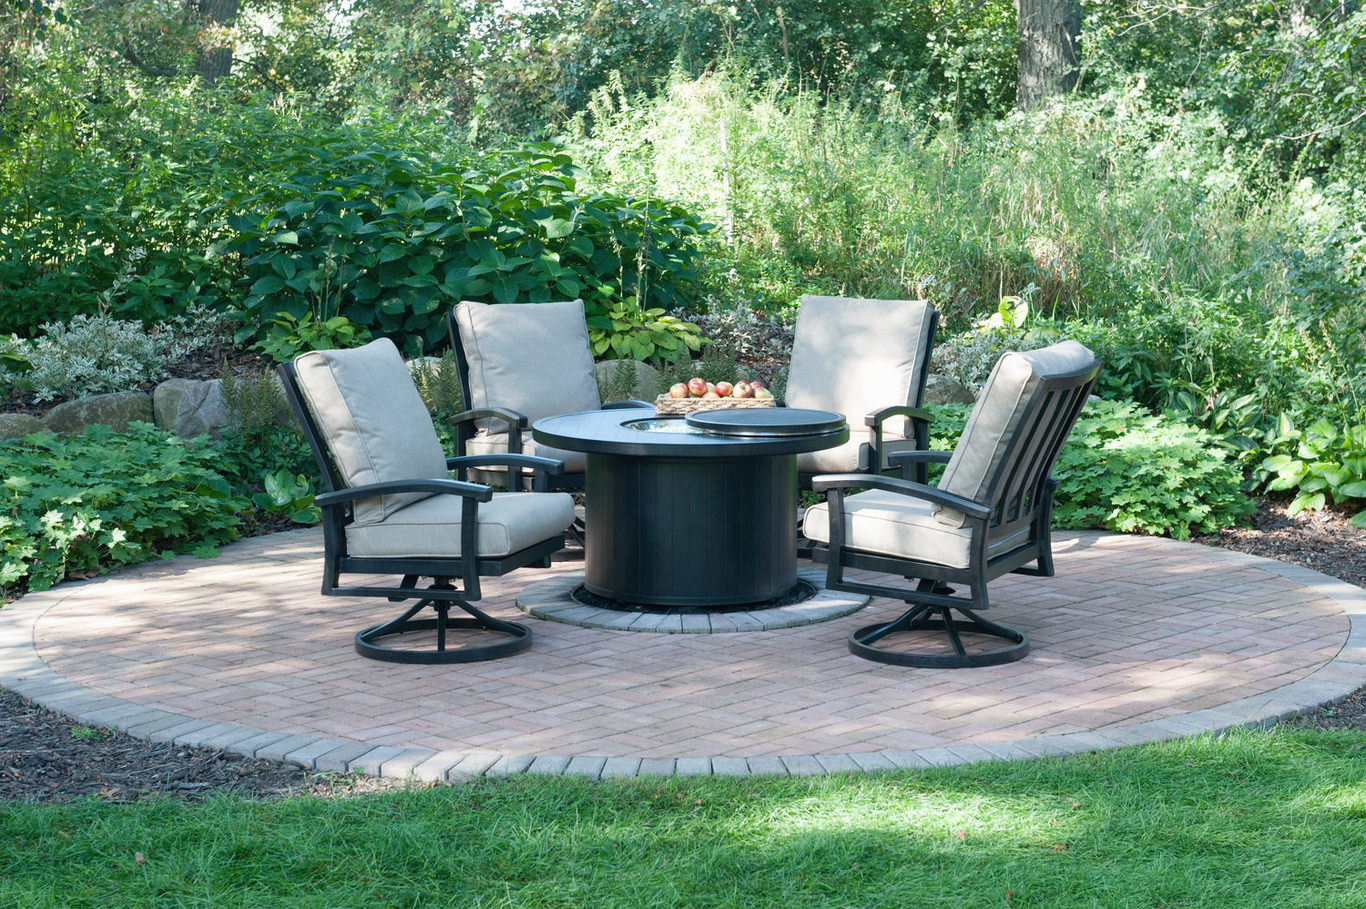 Fire Tables, the Hottest Trend In Patio Design - design blog by HOM